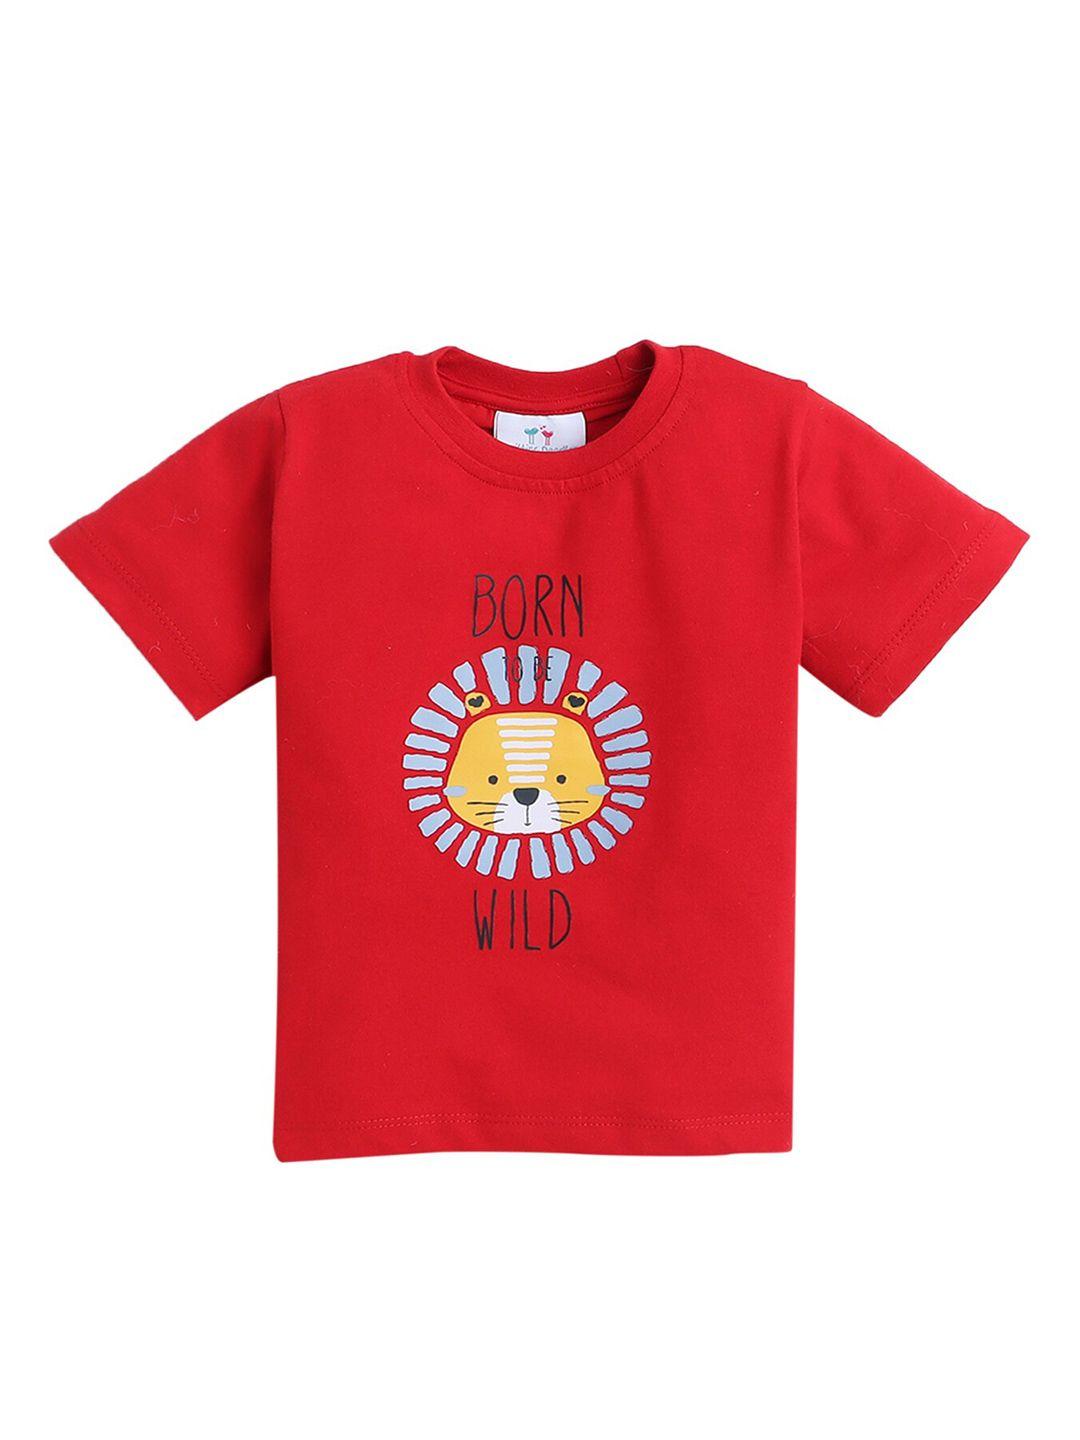 Knitting Doodles Boys Born To Be Wild Cub Printed Round Neck Regular Fit Cotton T-Shirt